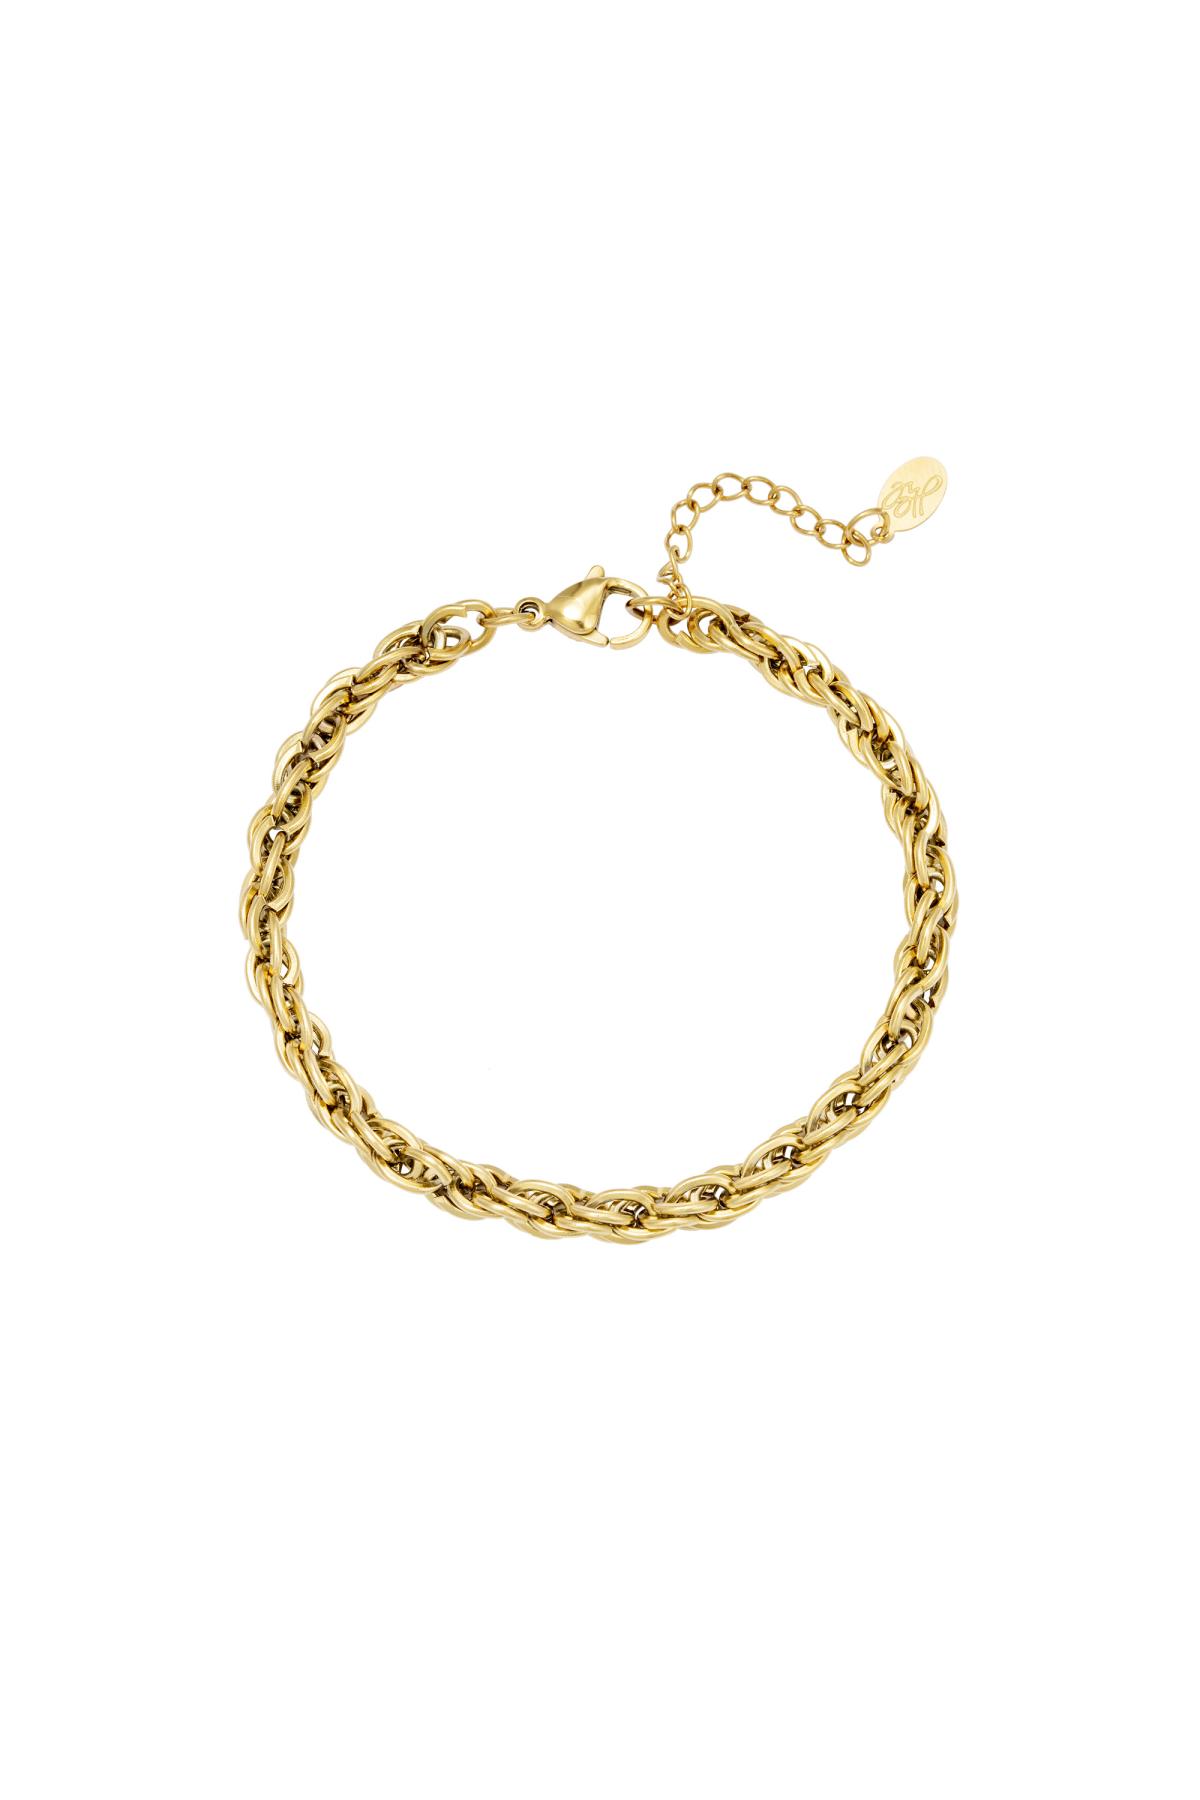 Bracelet Twisted Chain Gold Stainless Steel h5 